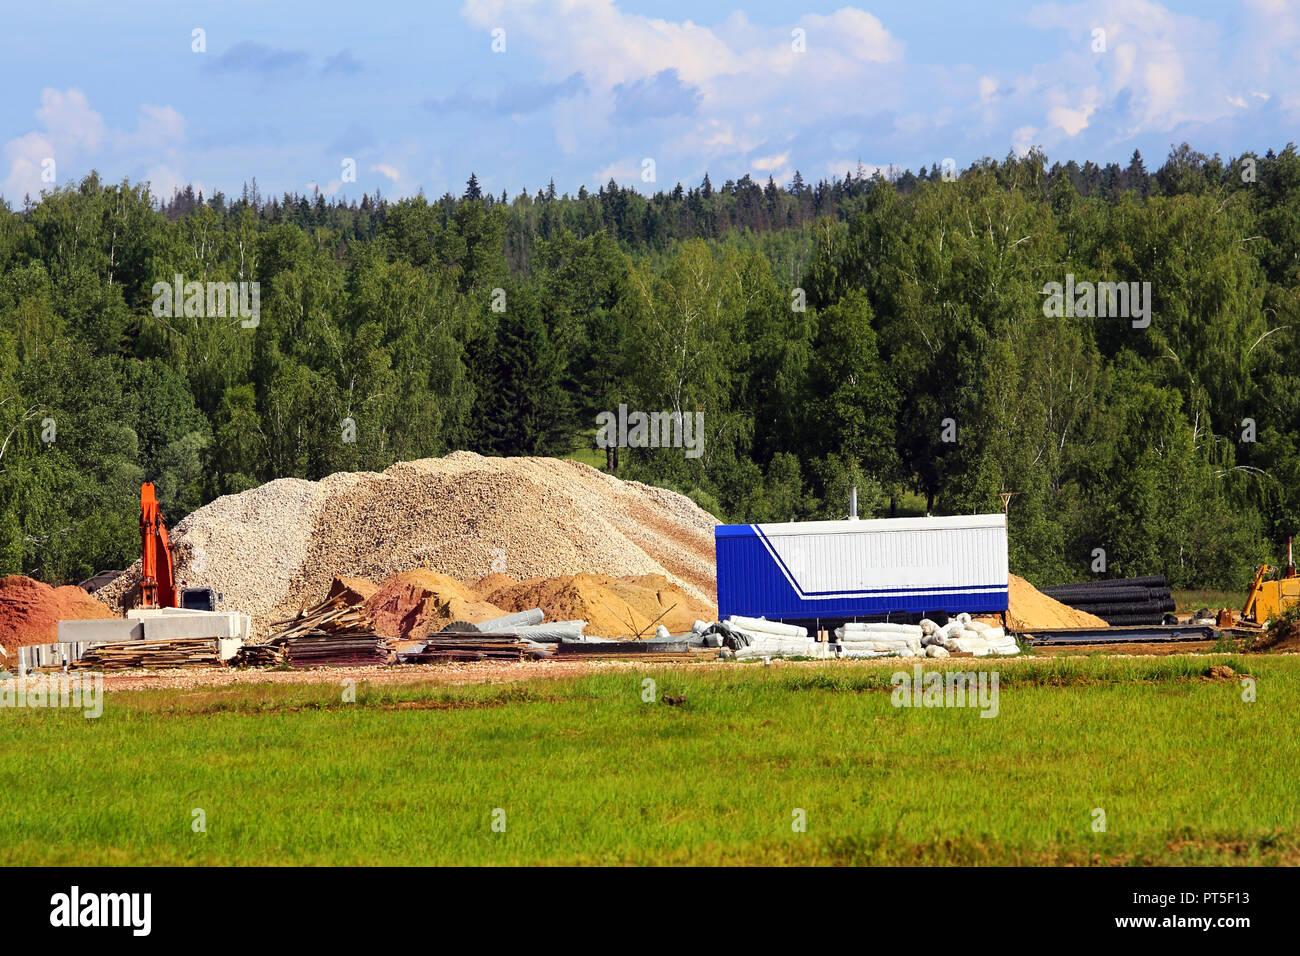 Building materials equipment and technics to start preliminary industrial construction works Stock Photo